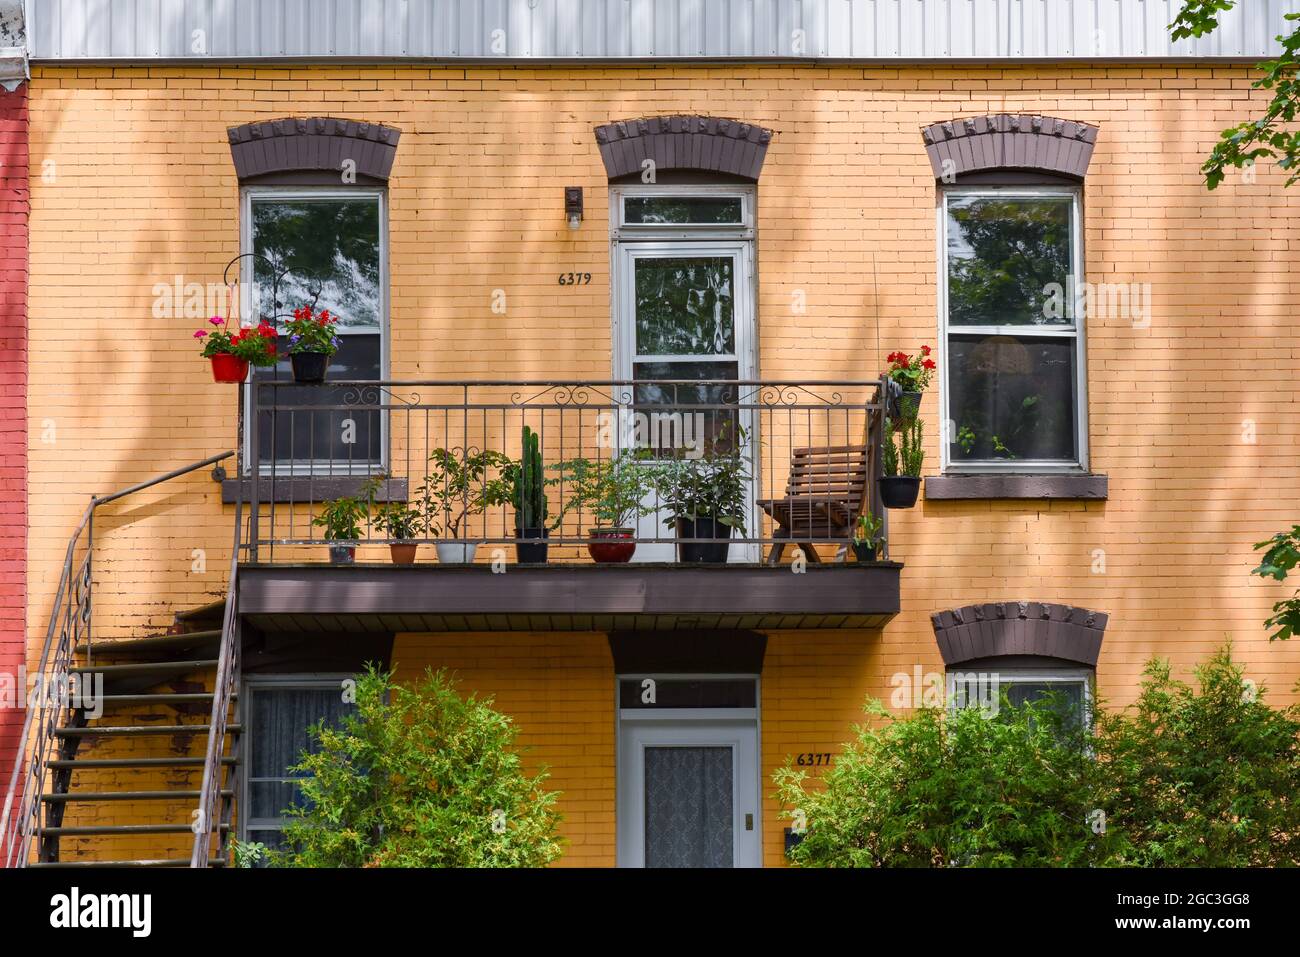 Typical duplex, Little Italy, Montreal, Canada Stock Photo